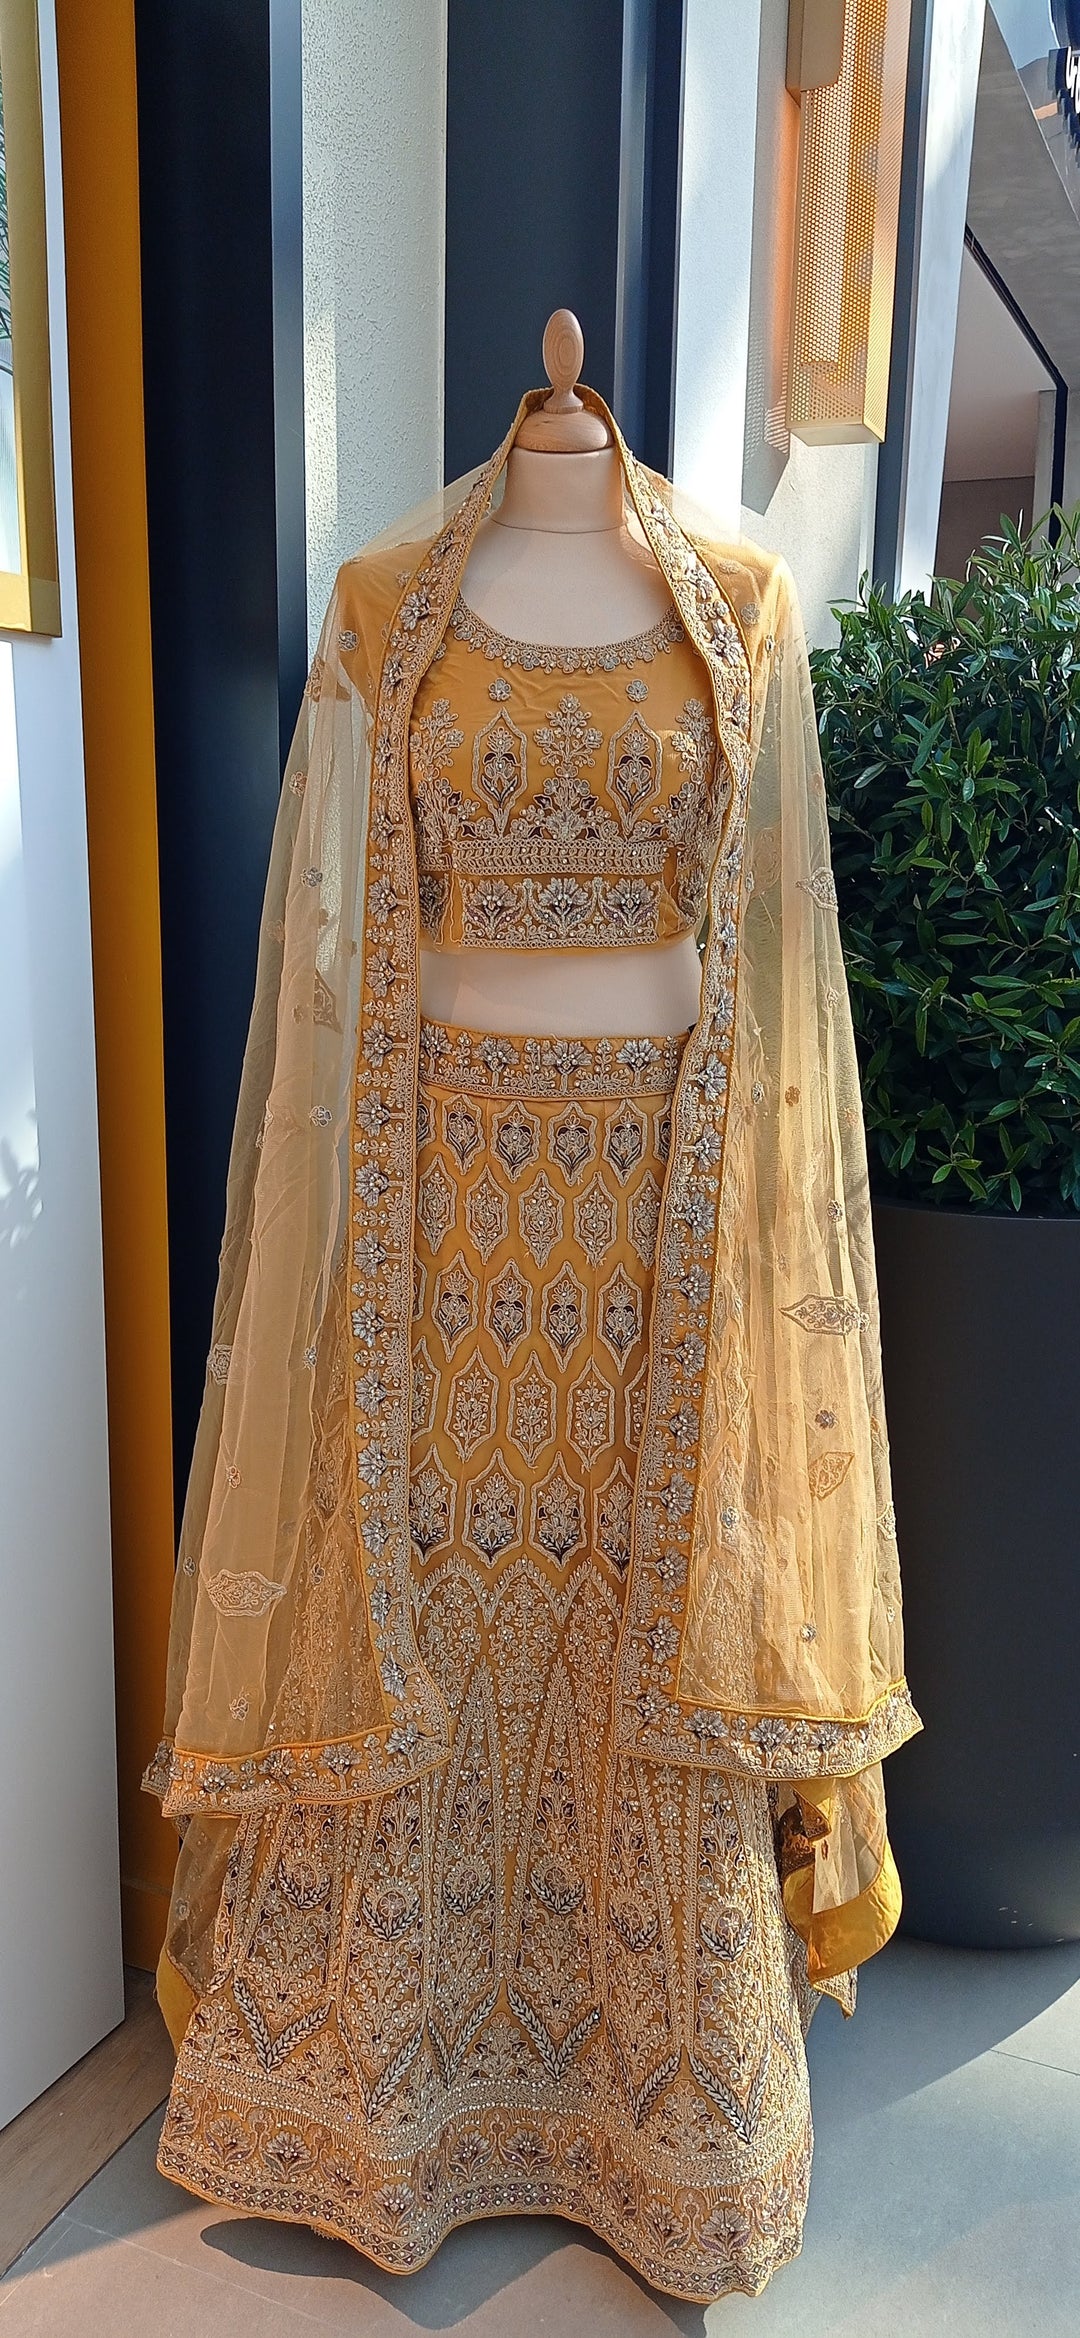 Shagun Earthy Mustard Lehenga with Geometric Embroidery (Unstitched)